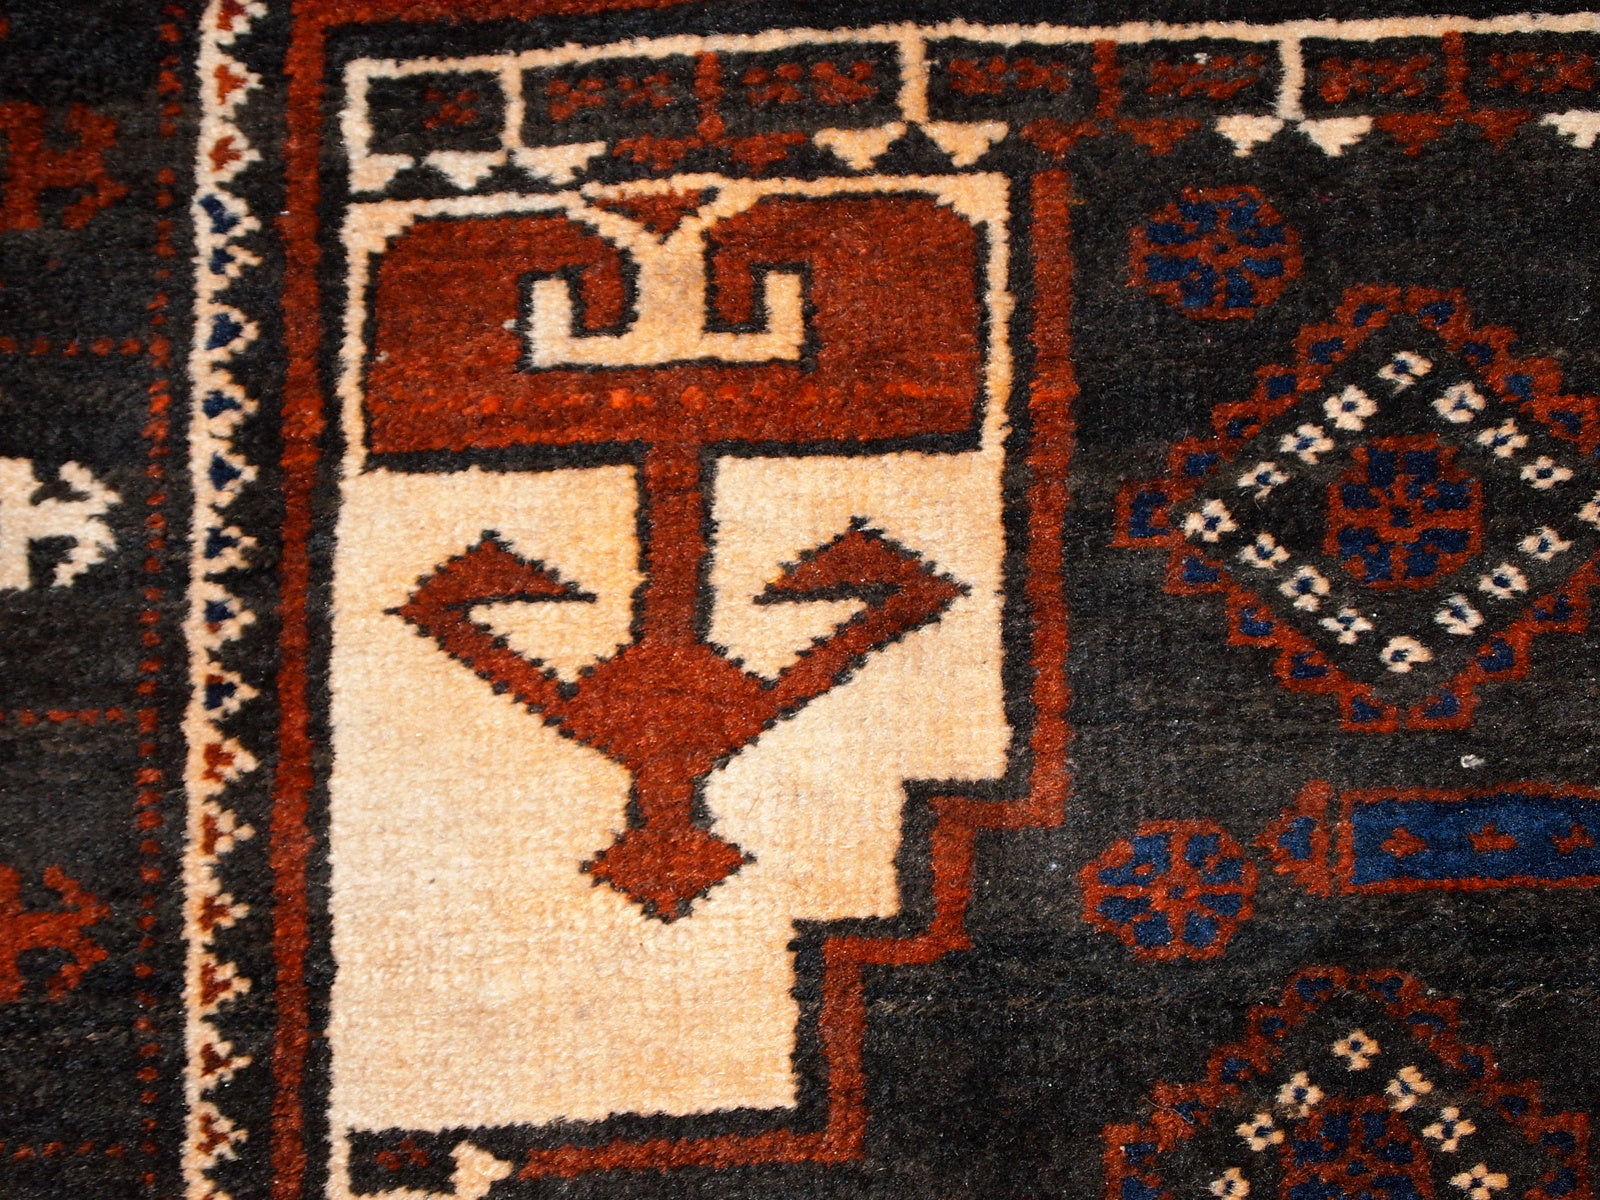 Close-up of the chocolate brown background of the Afghan rug.